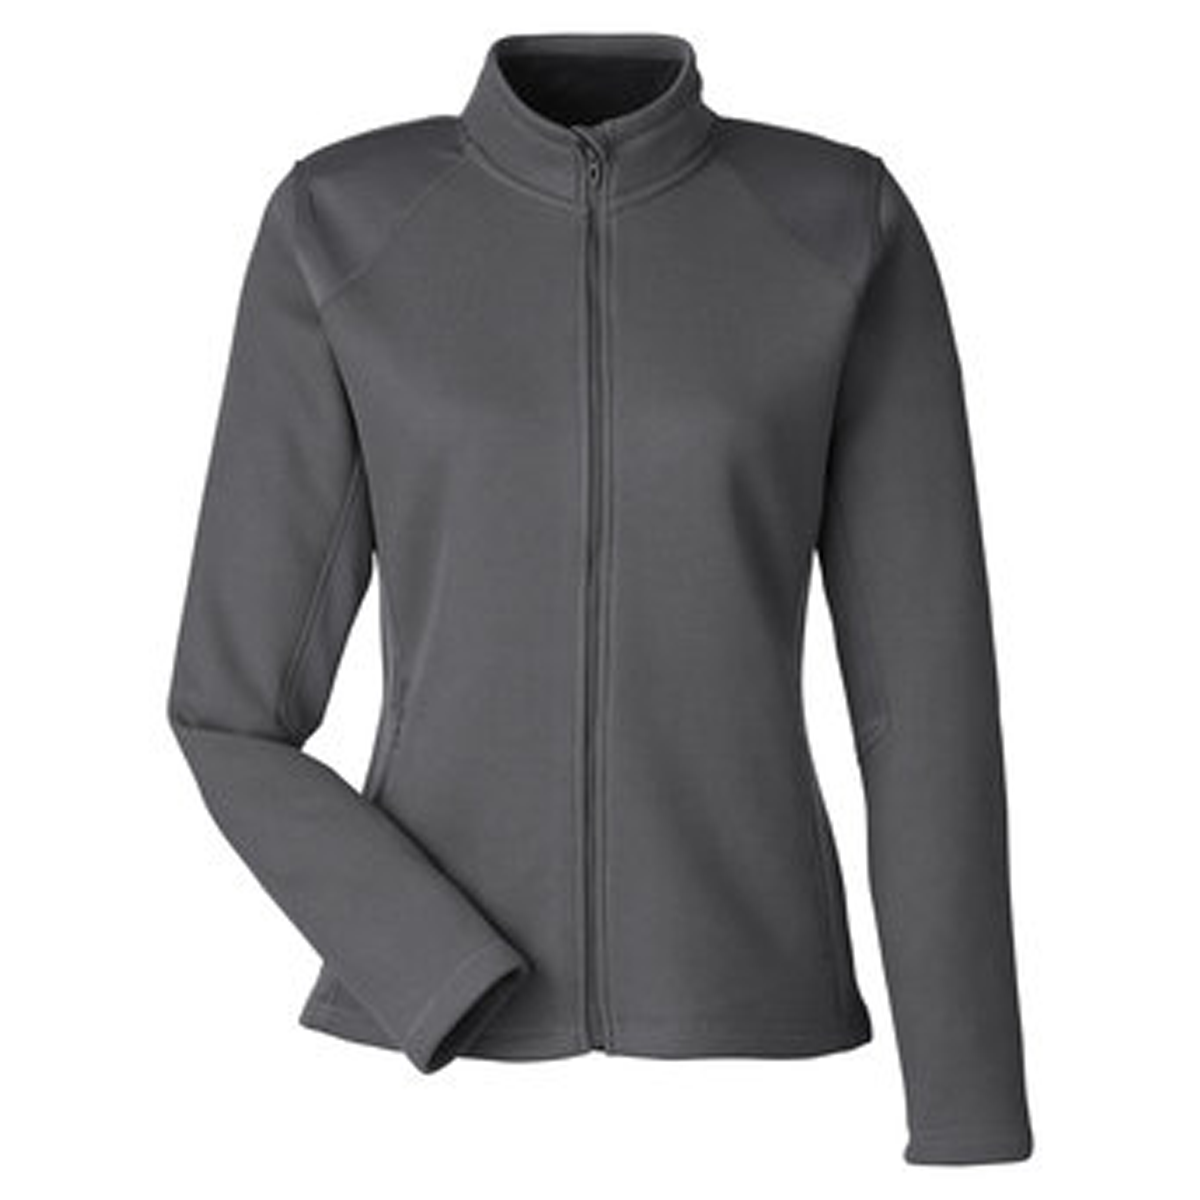 SPYDER LADIES CONSTANT CANYON SWEATER